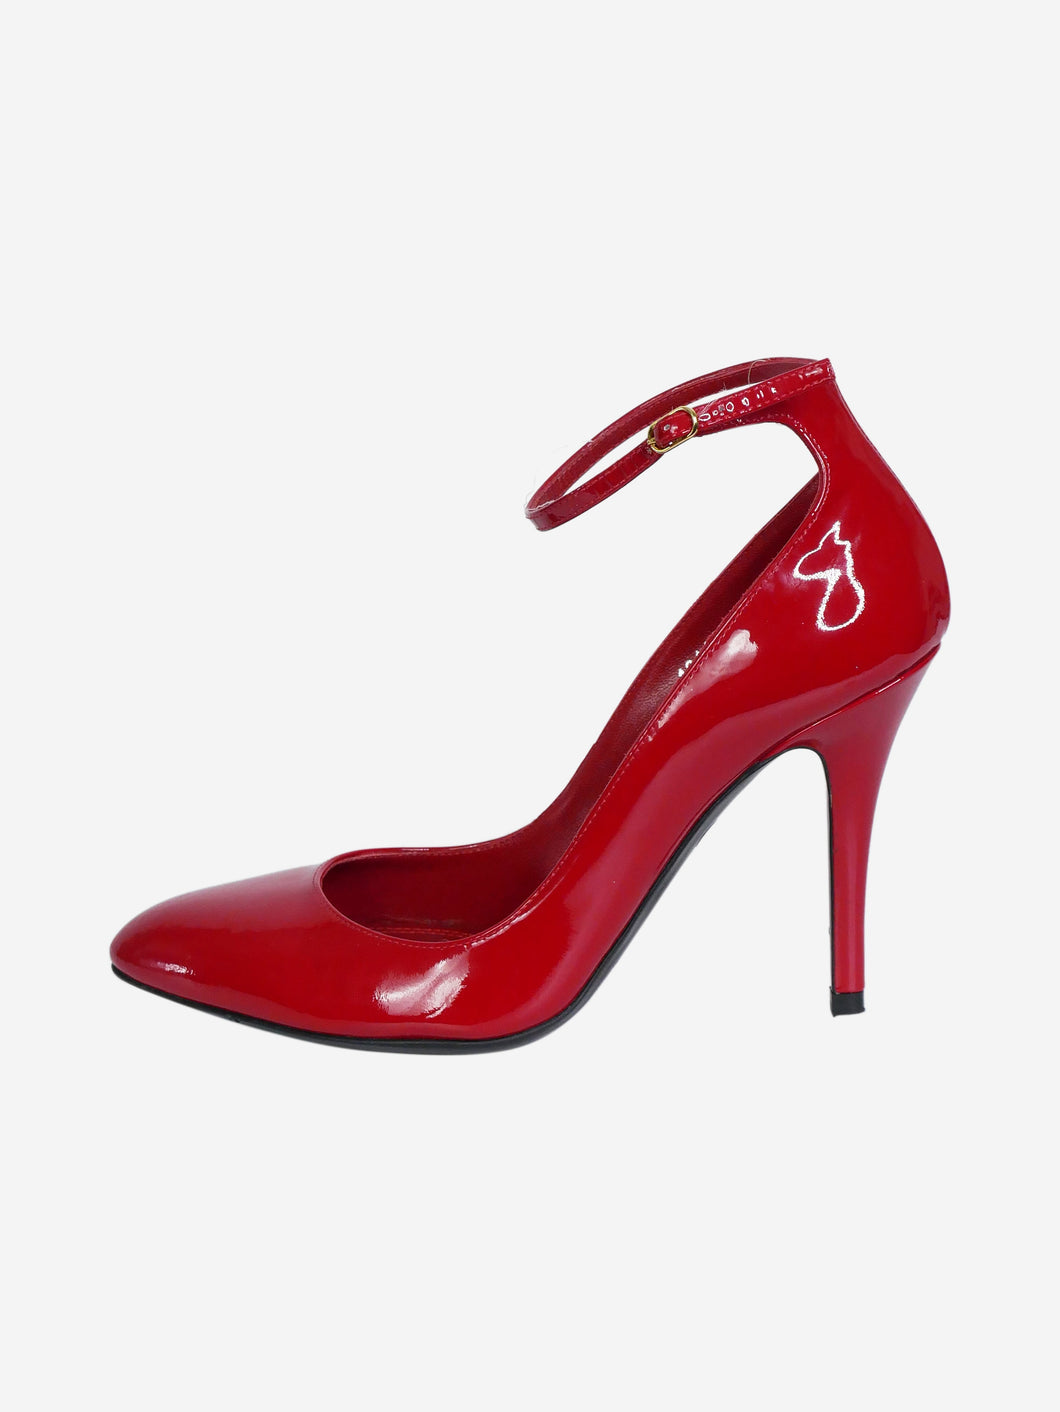 Red heels with ankle strap - size EU 38 Shoes Ralph Lauren 